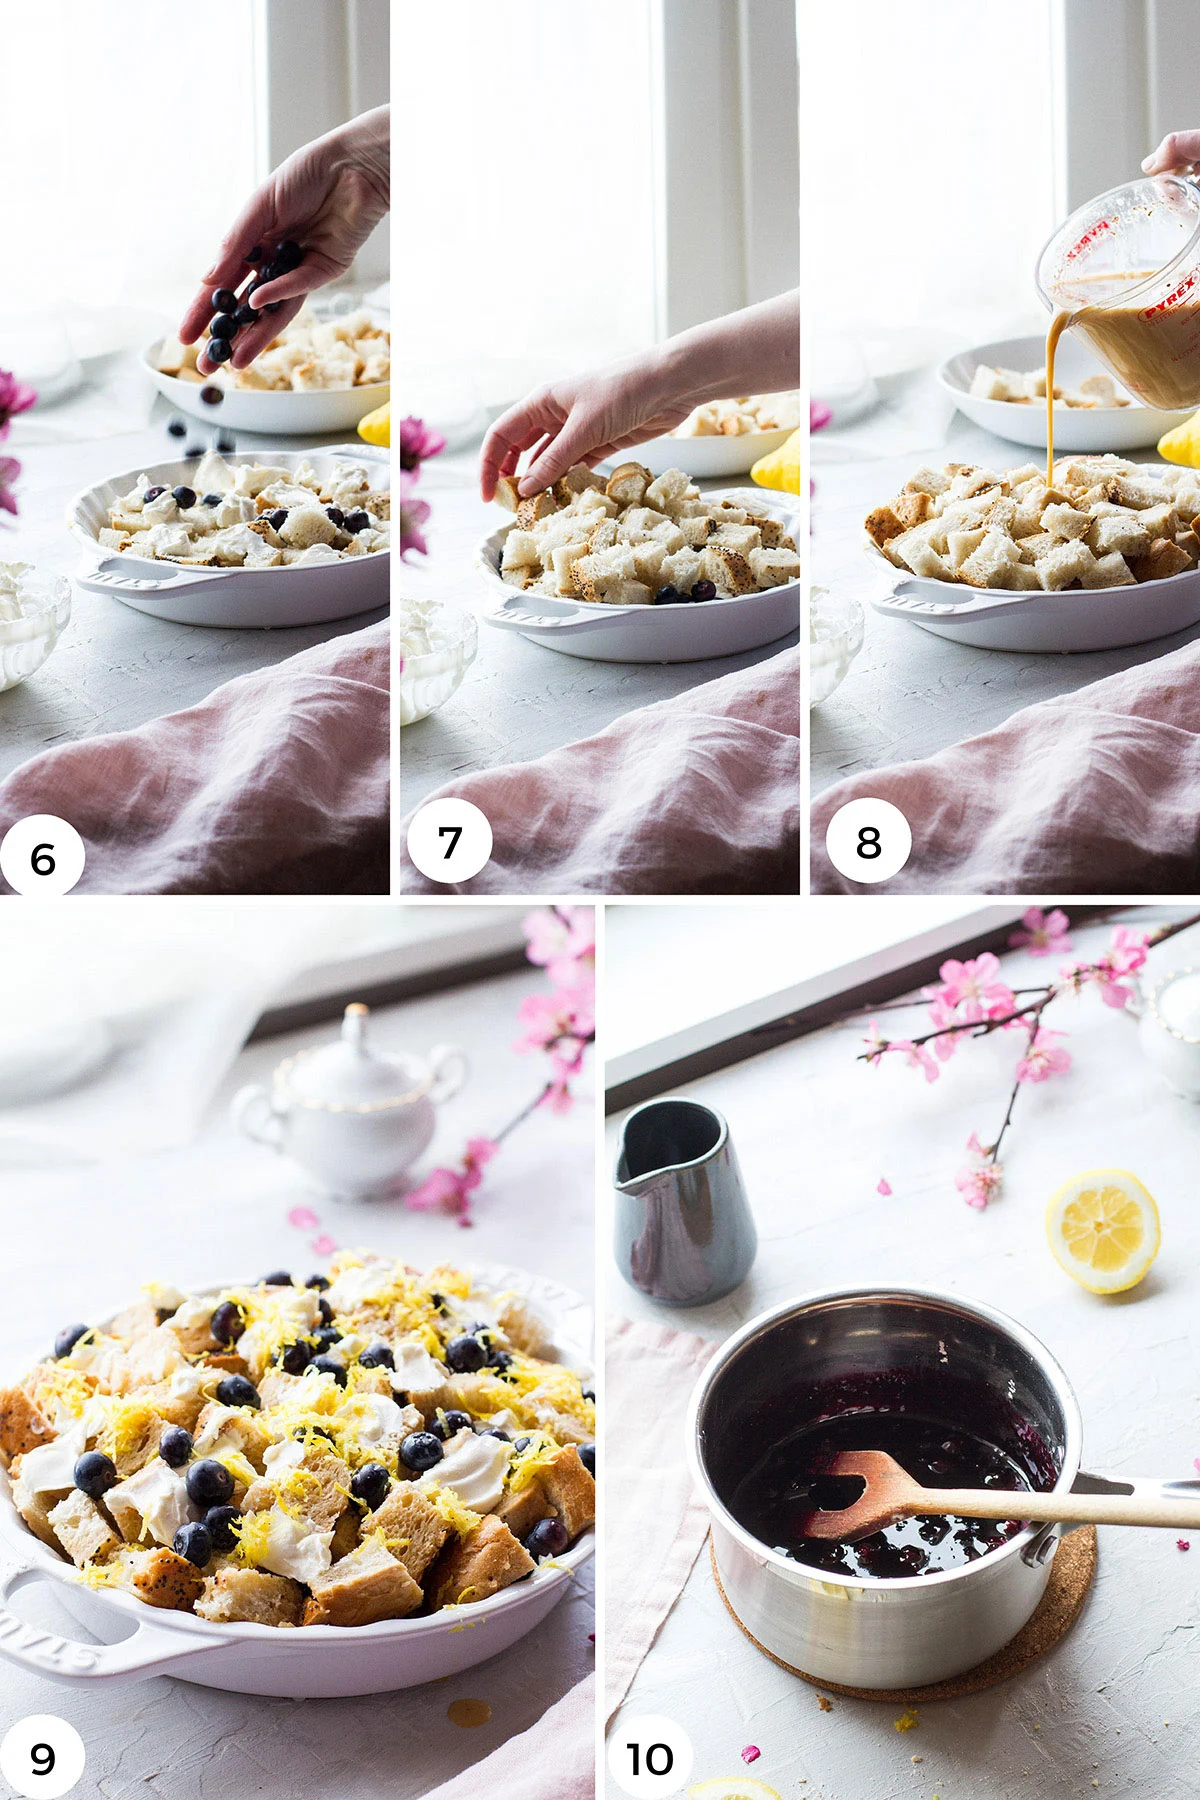 Steps to assemple the French toast casserole and the blueberry sauce.